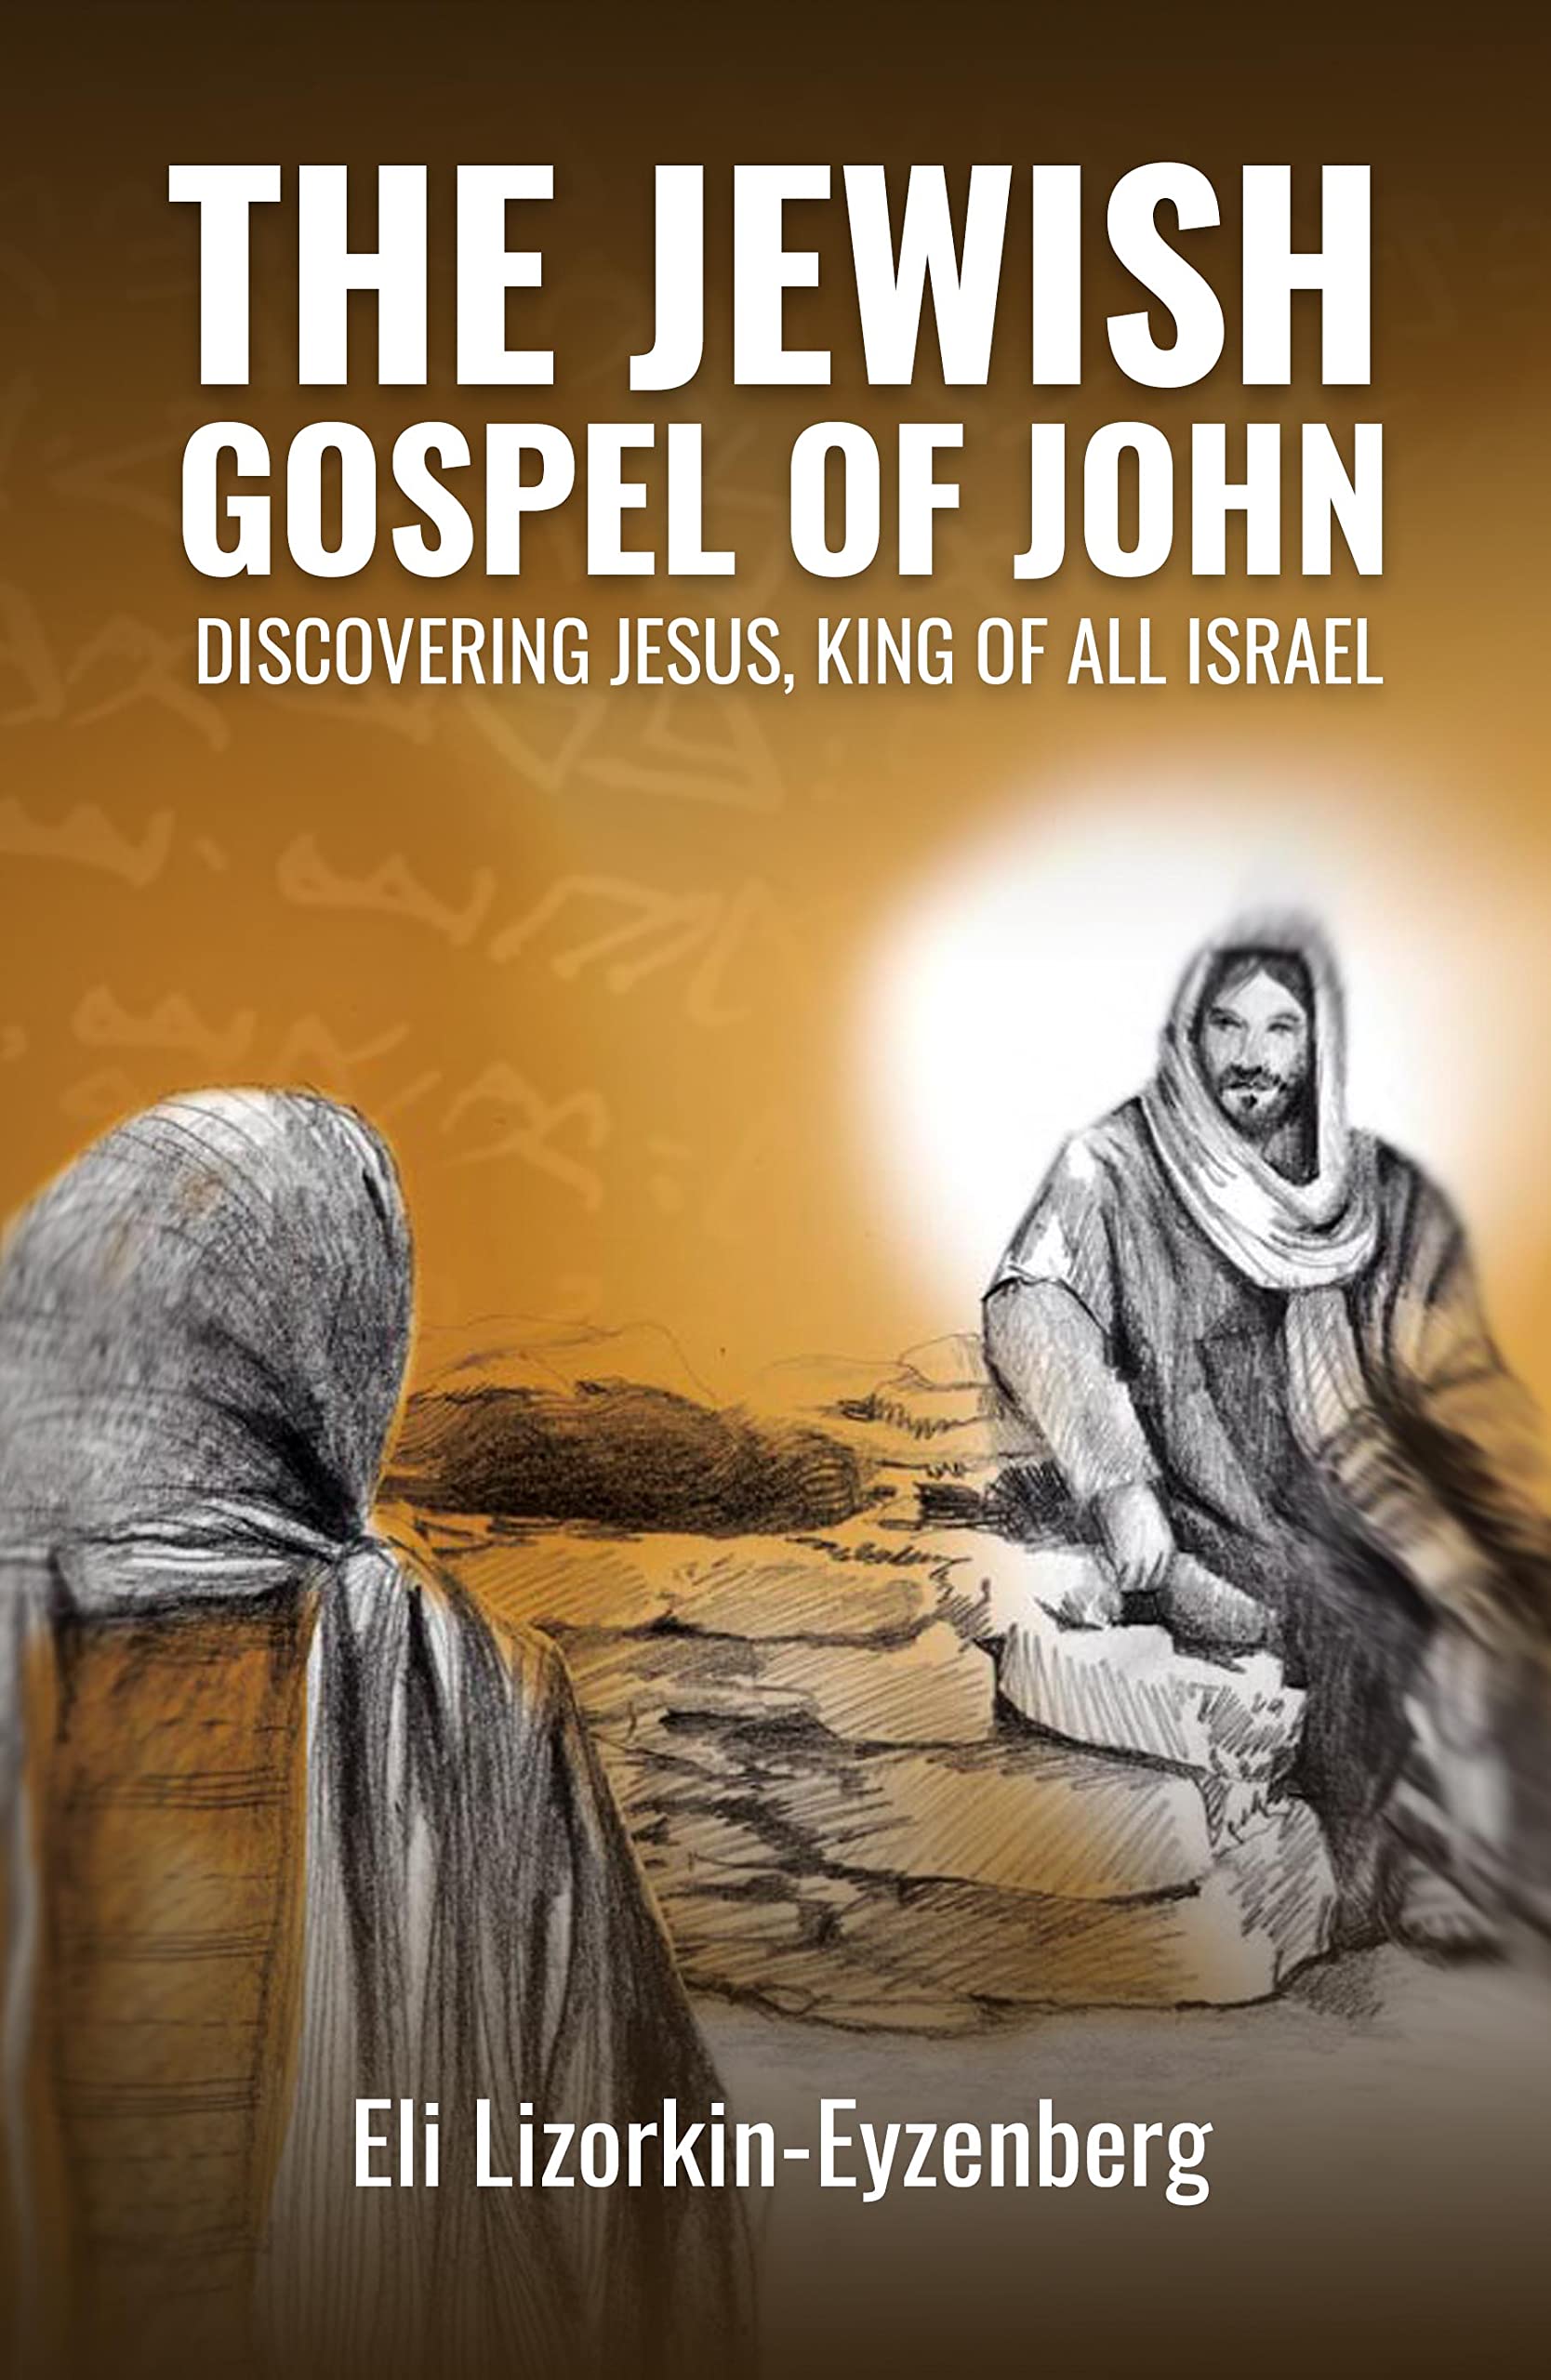 The Jewish Gospel of John: Discovering Jesus, King of All Israel (Jewish Studies for Christians Book 6)